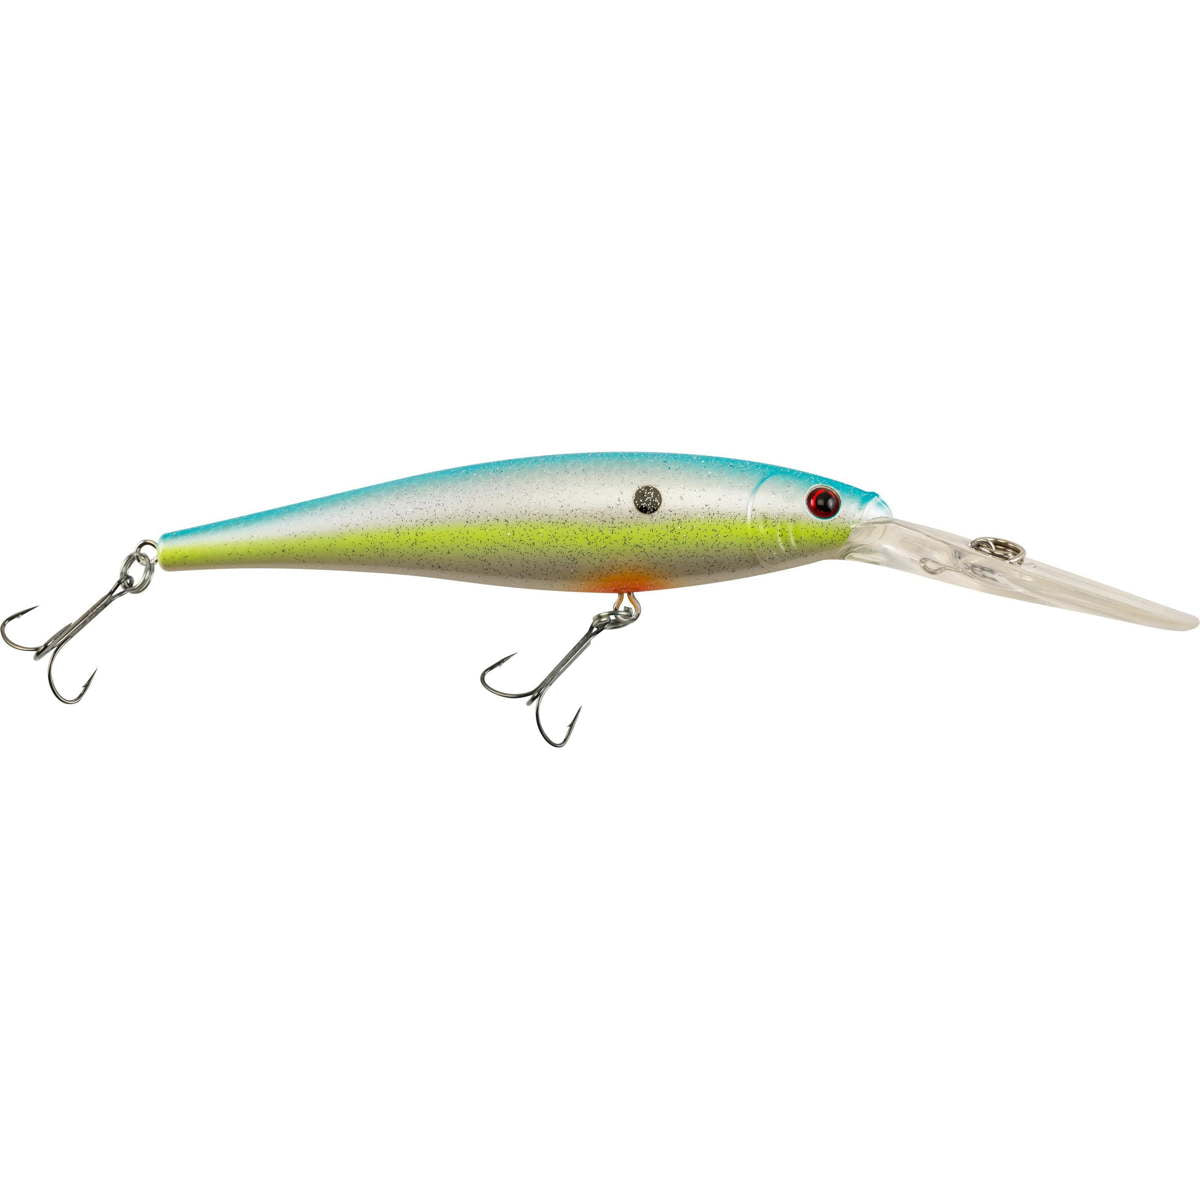 Photo of Berkley Flicker Minnow for sale at United Tackle Shops.